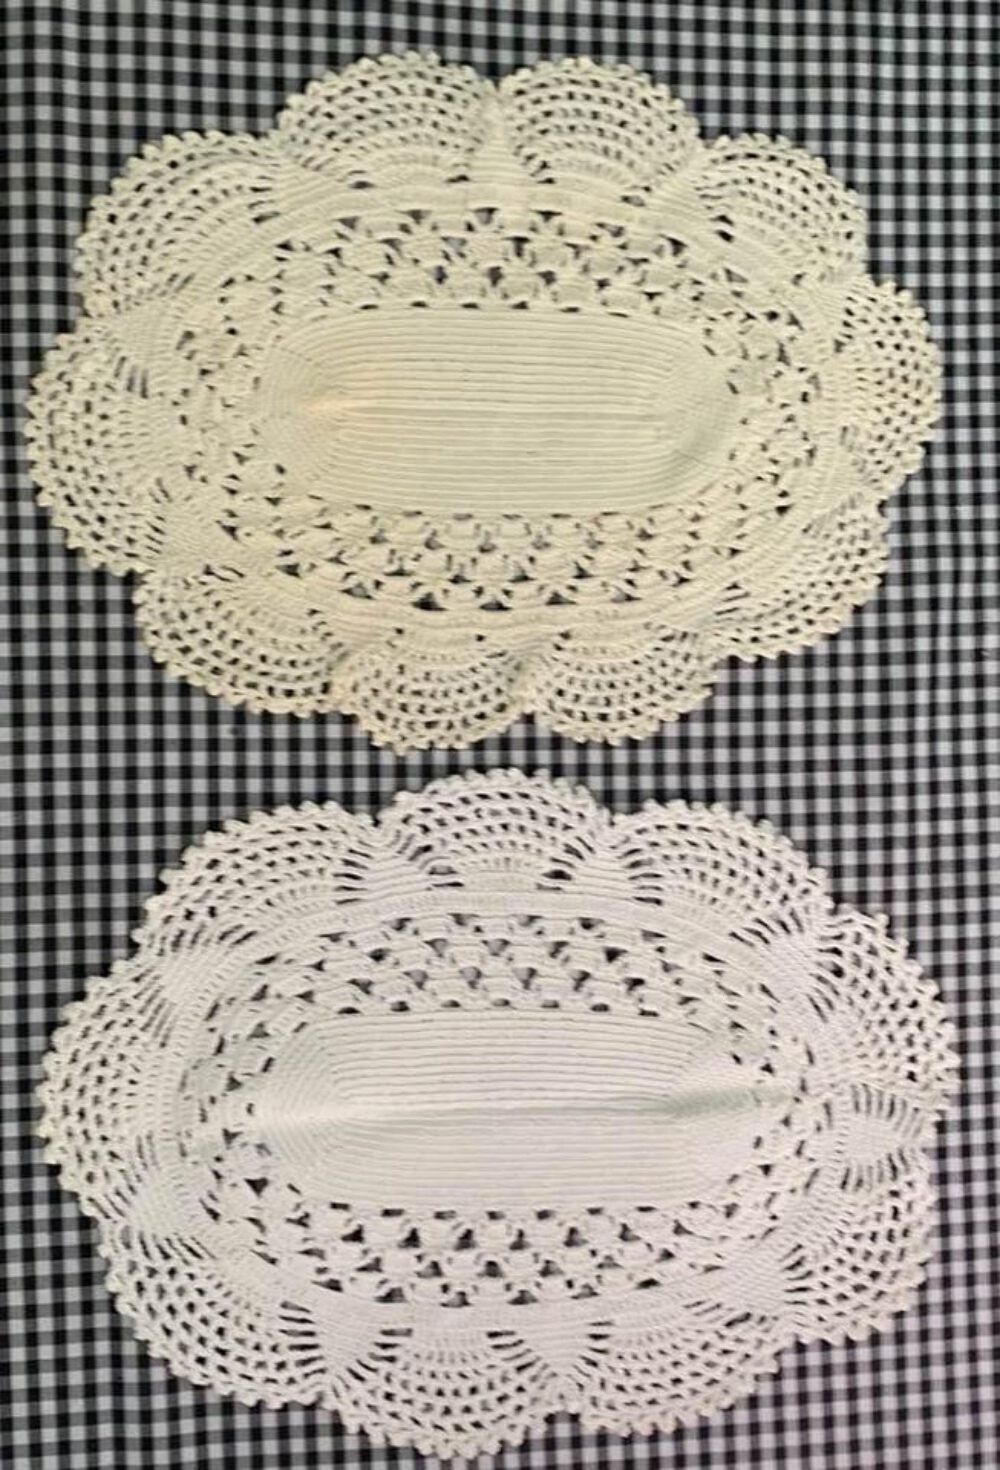 Primary image for Vintage Doily Set of 2 #7w